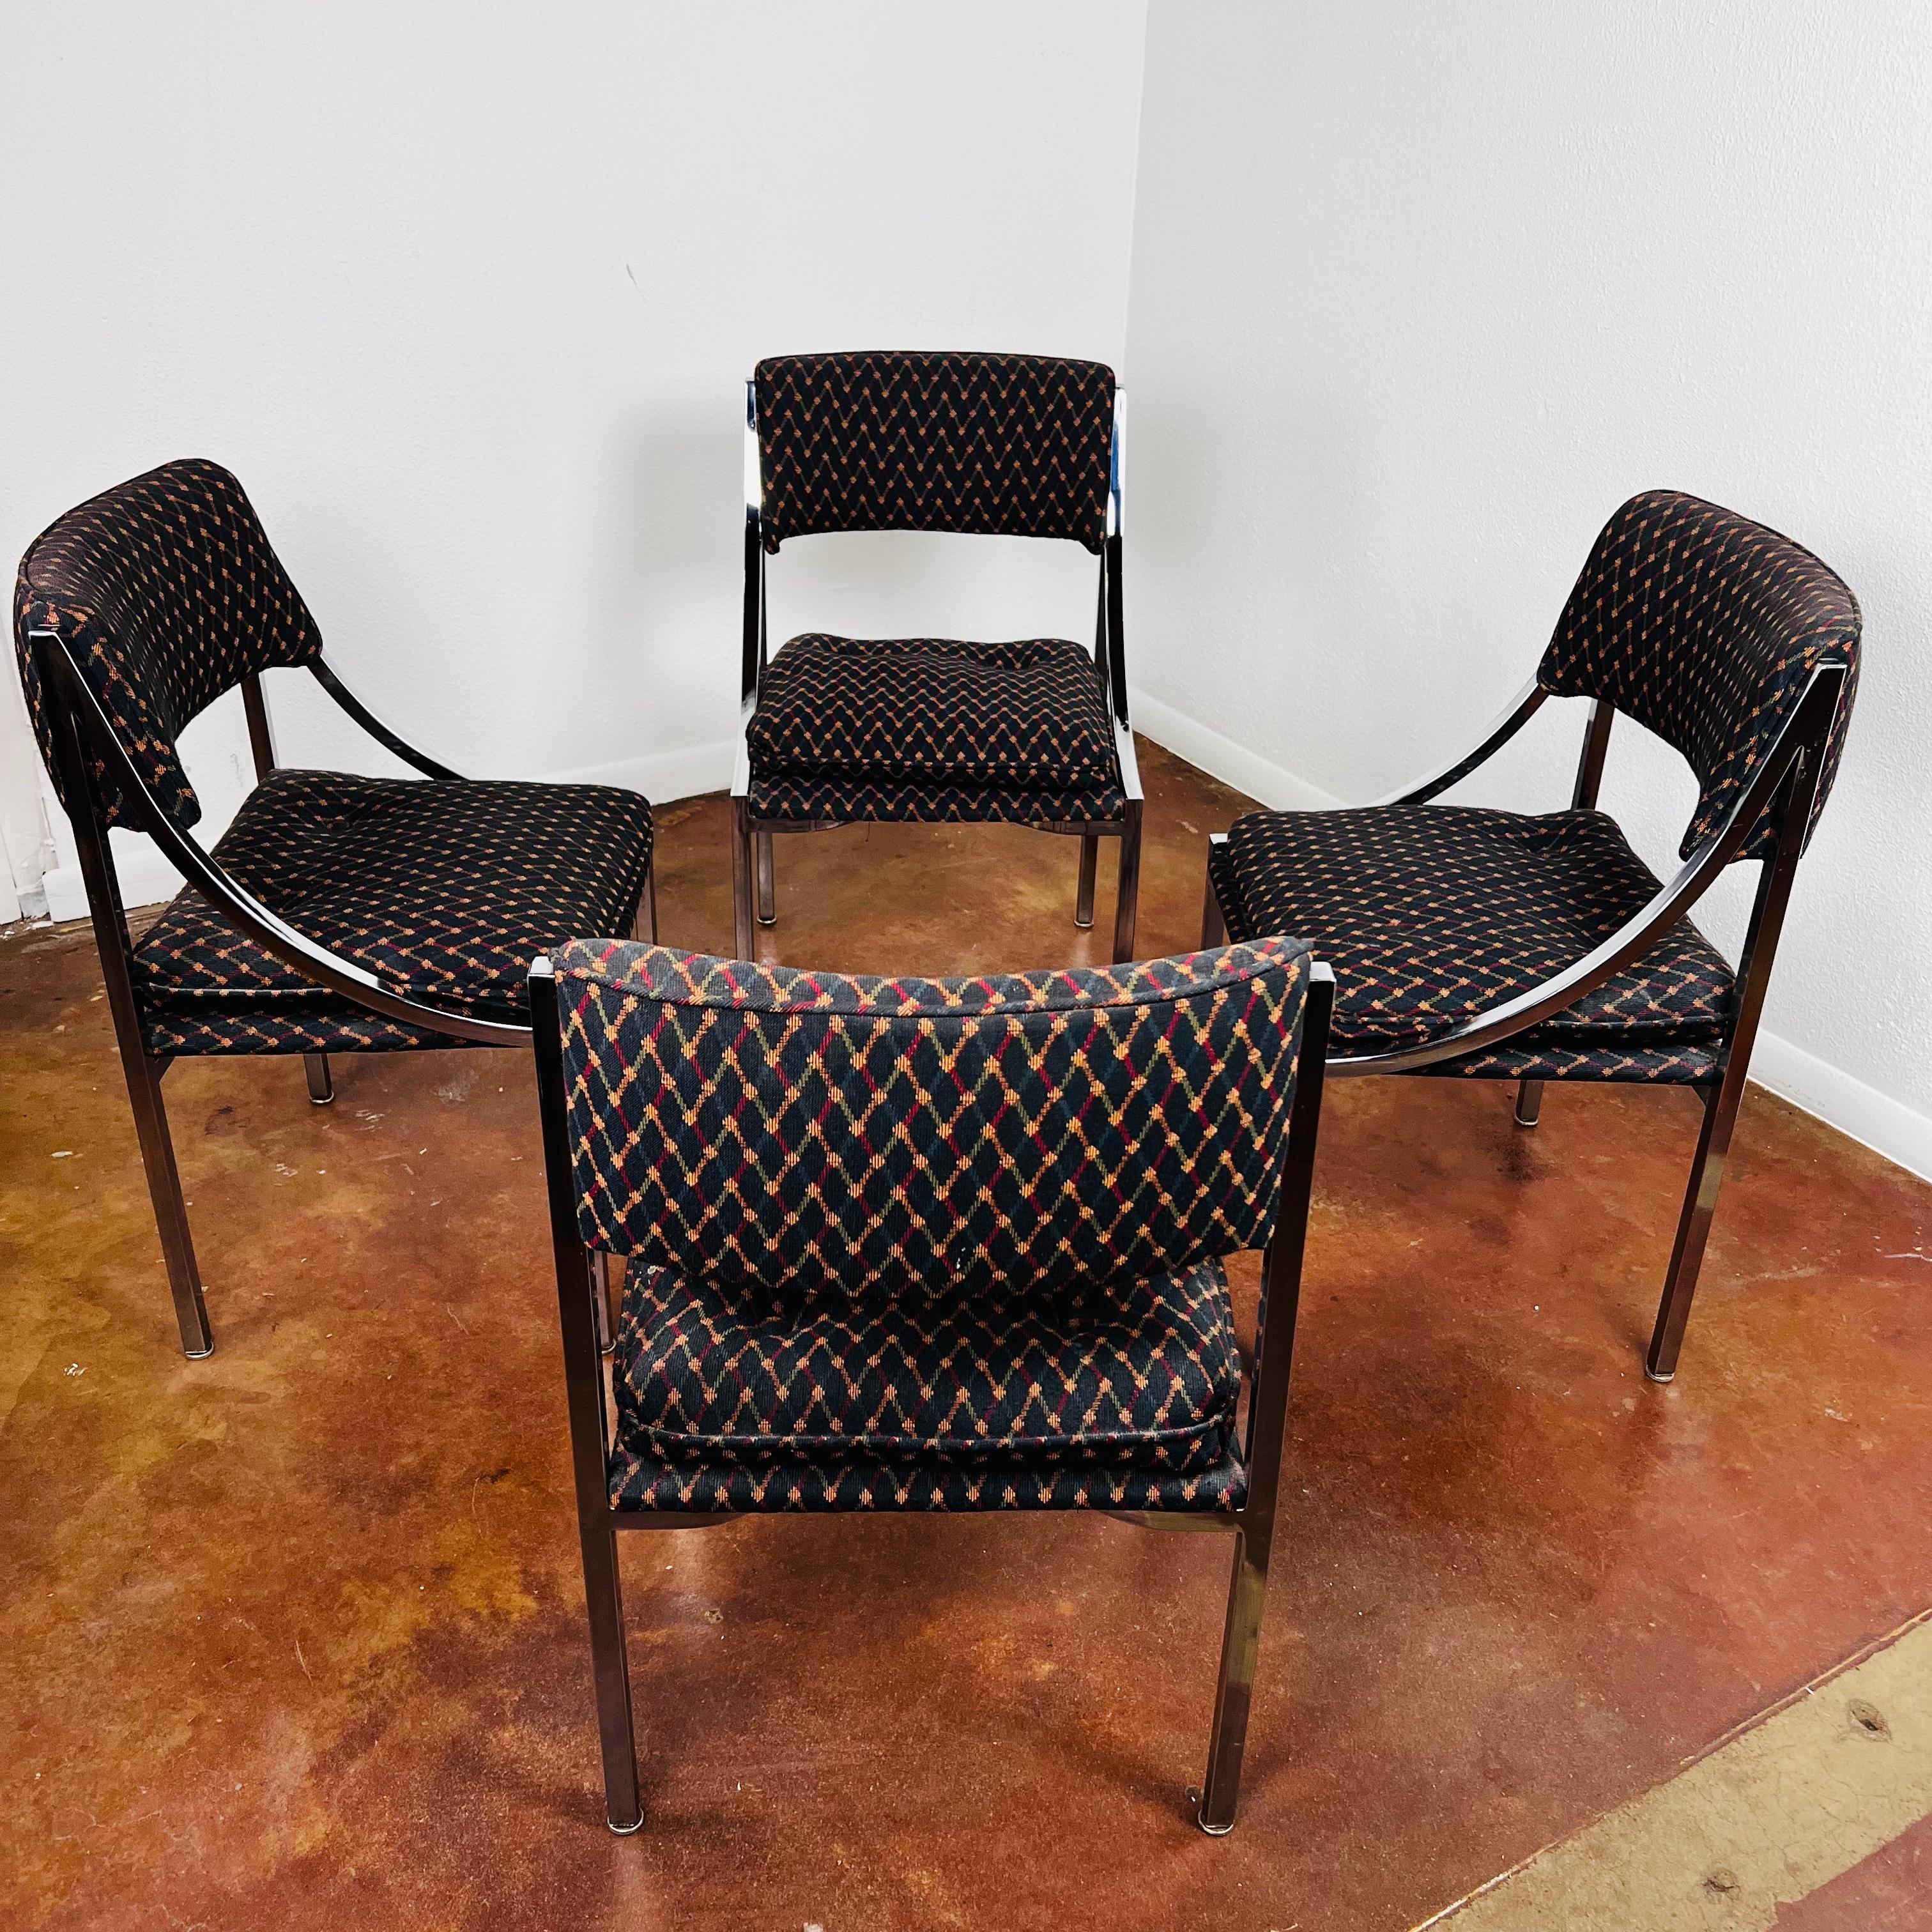 Fabulous set of 4 vintage dining chairs by Wolfgang Hoffmann for Howell Co. Flat chromium plated steel frames support upholstered seats and back. Clean upholstery, some signs of wear due to age and use but no rips, stains, tears, or rust. 
Seats